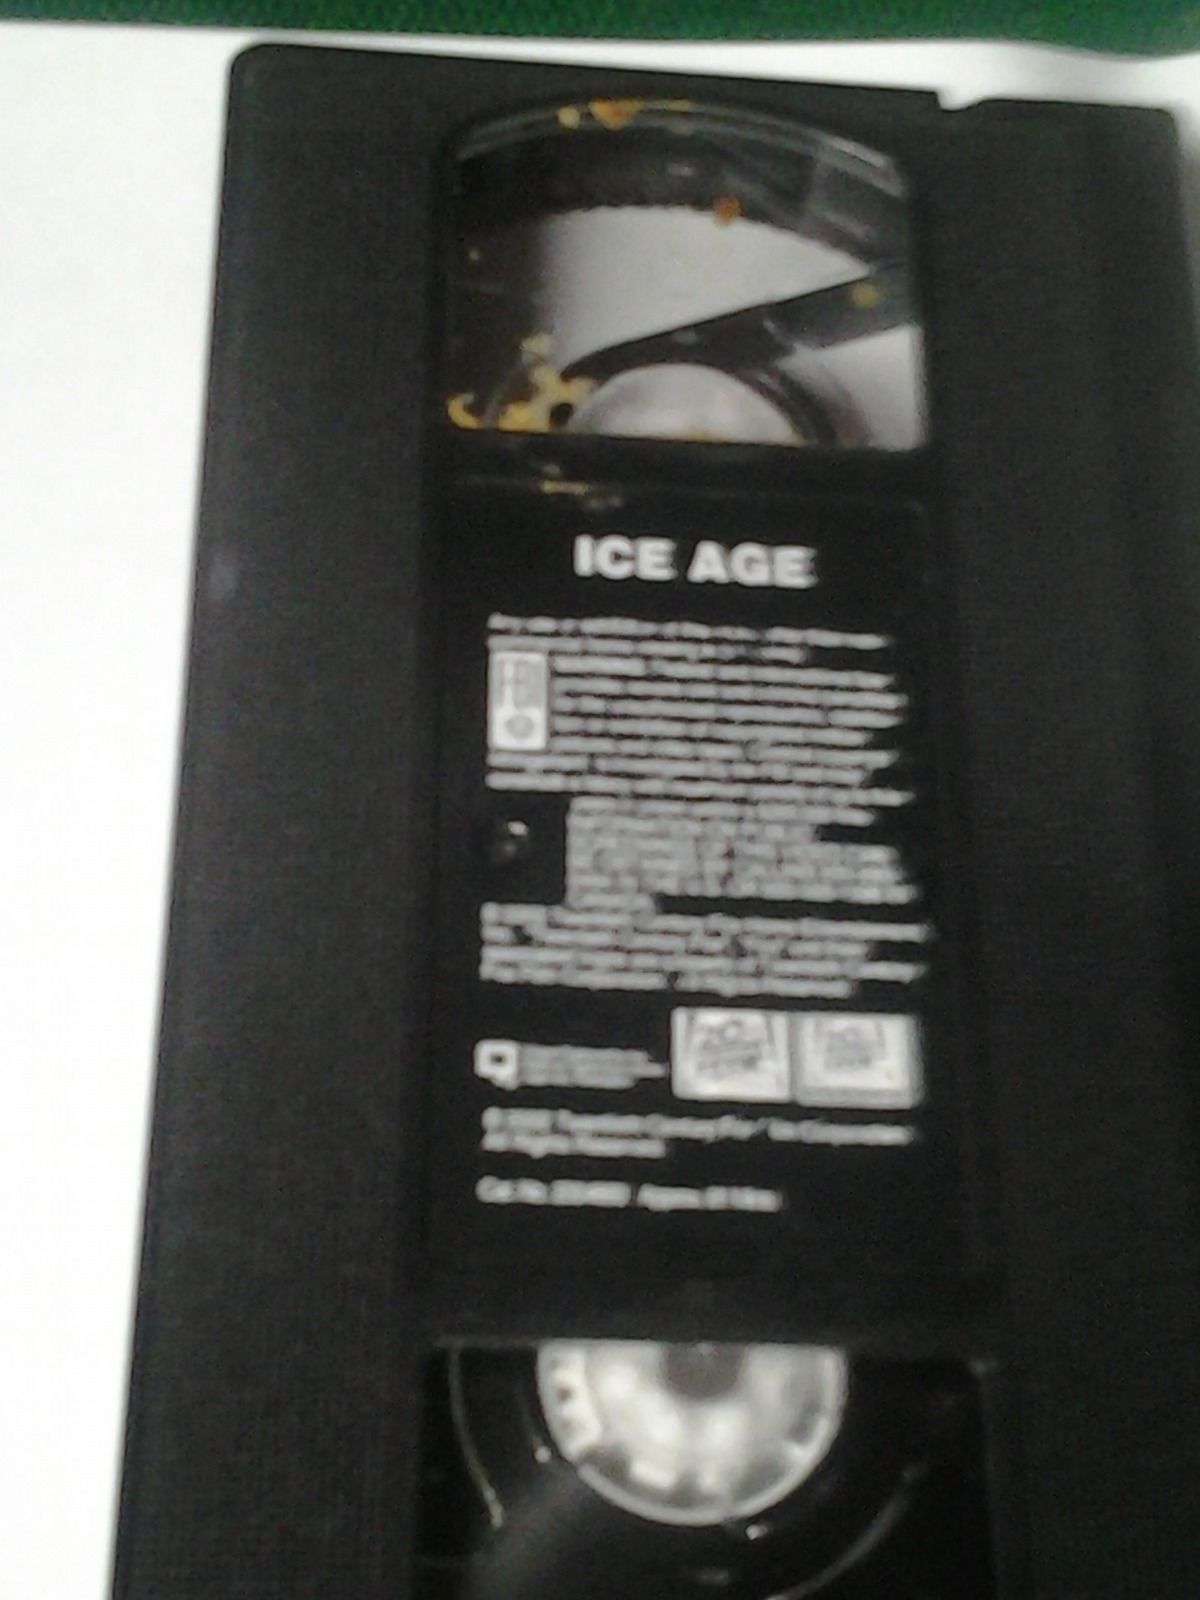 ice age (vhs, 2005) clamshell case includes scrat